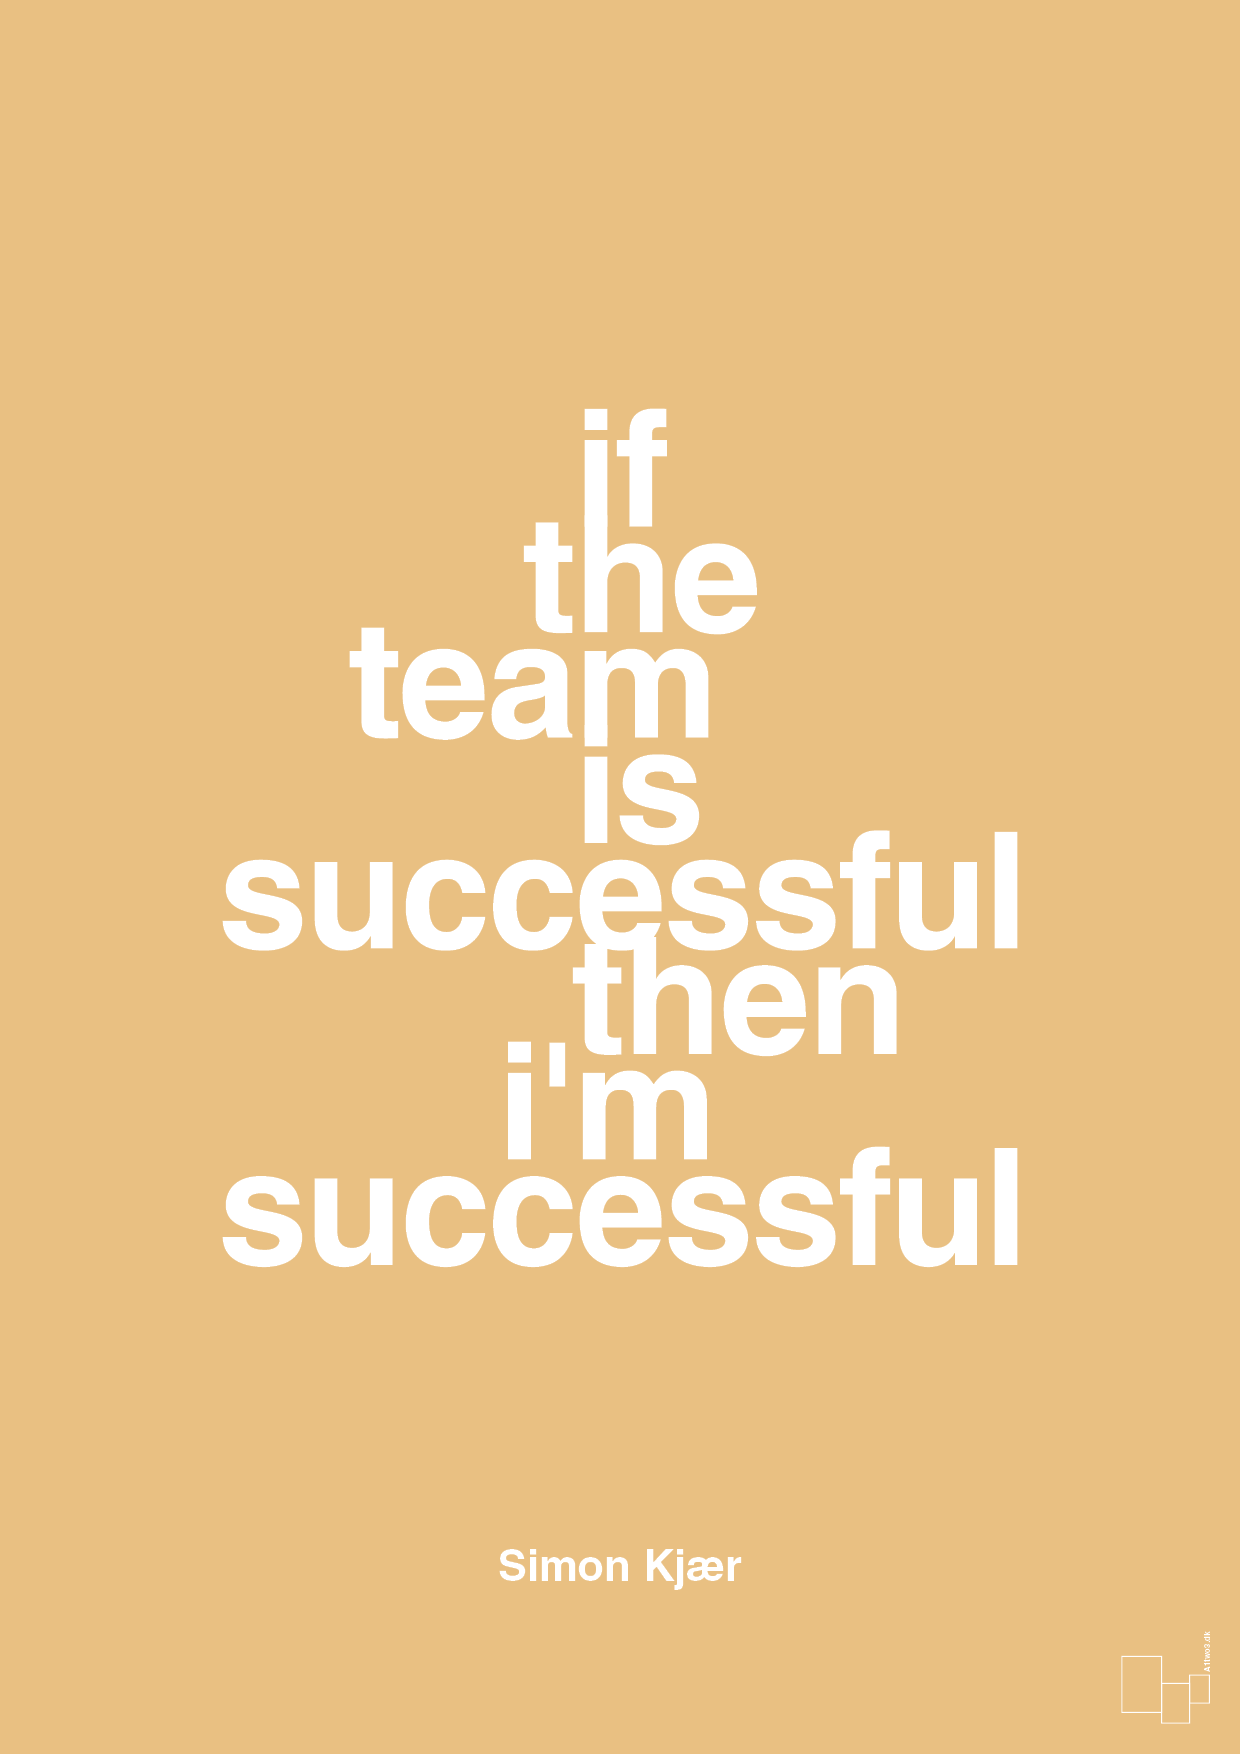 if the team is successful then i'm successful - Plakat med Citater i Charismatic